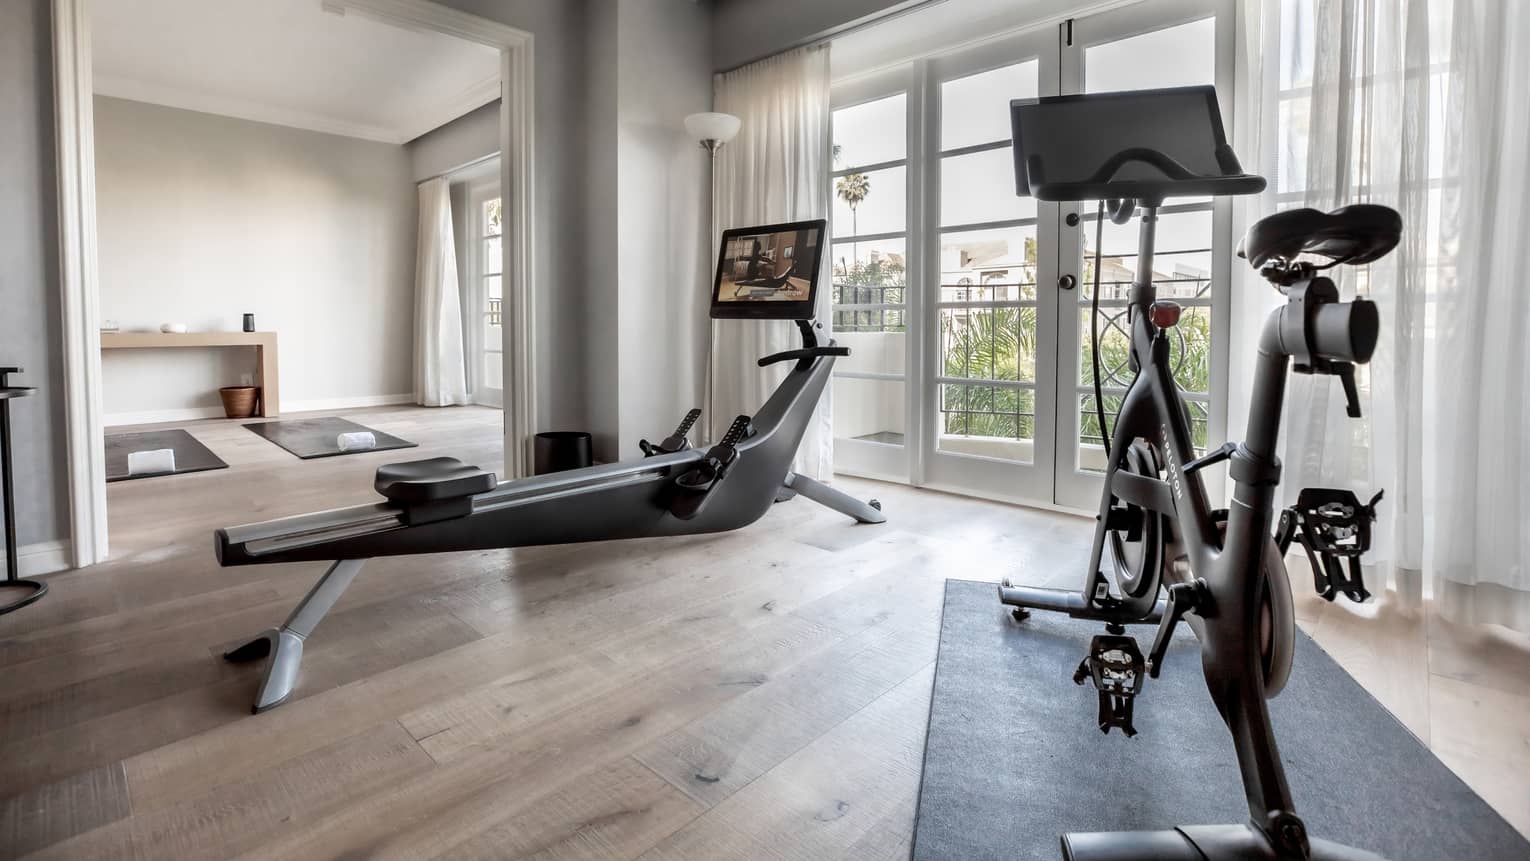 A hotel room with a rower and stationary bike facing window, wooden floors